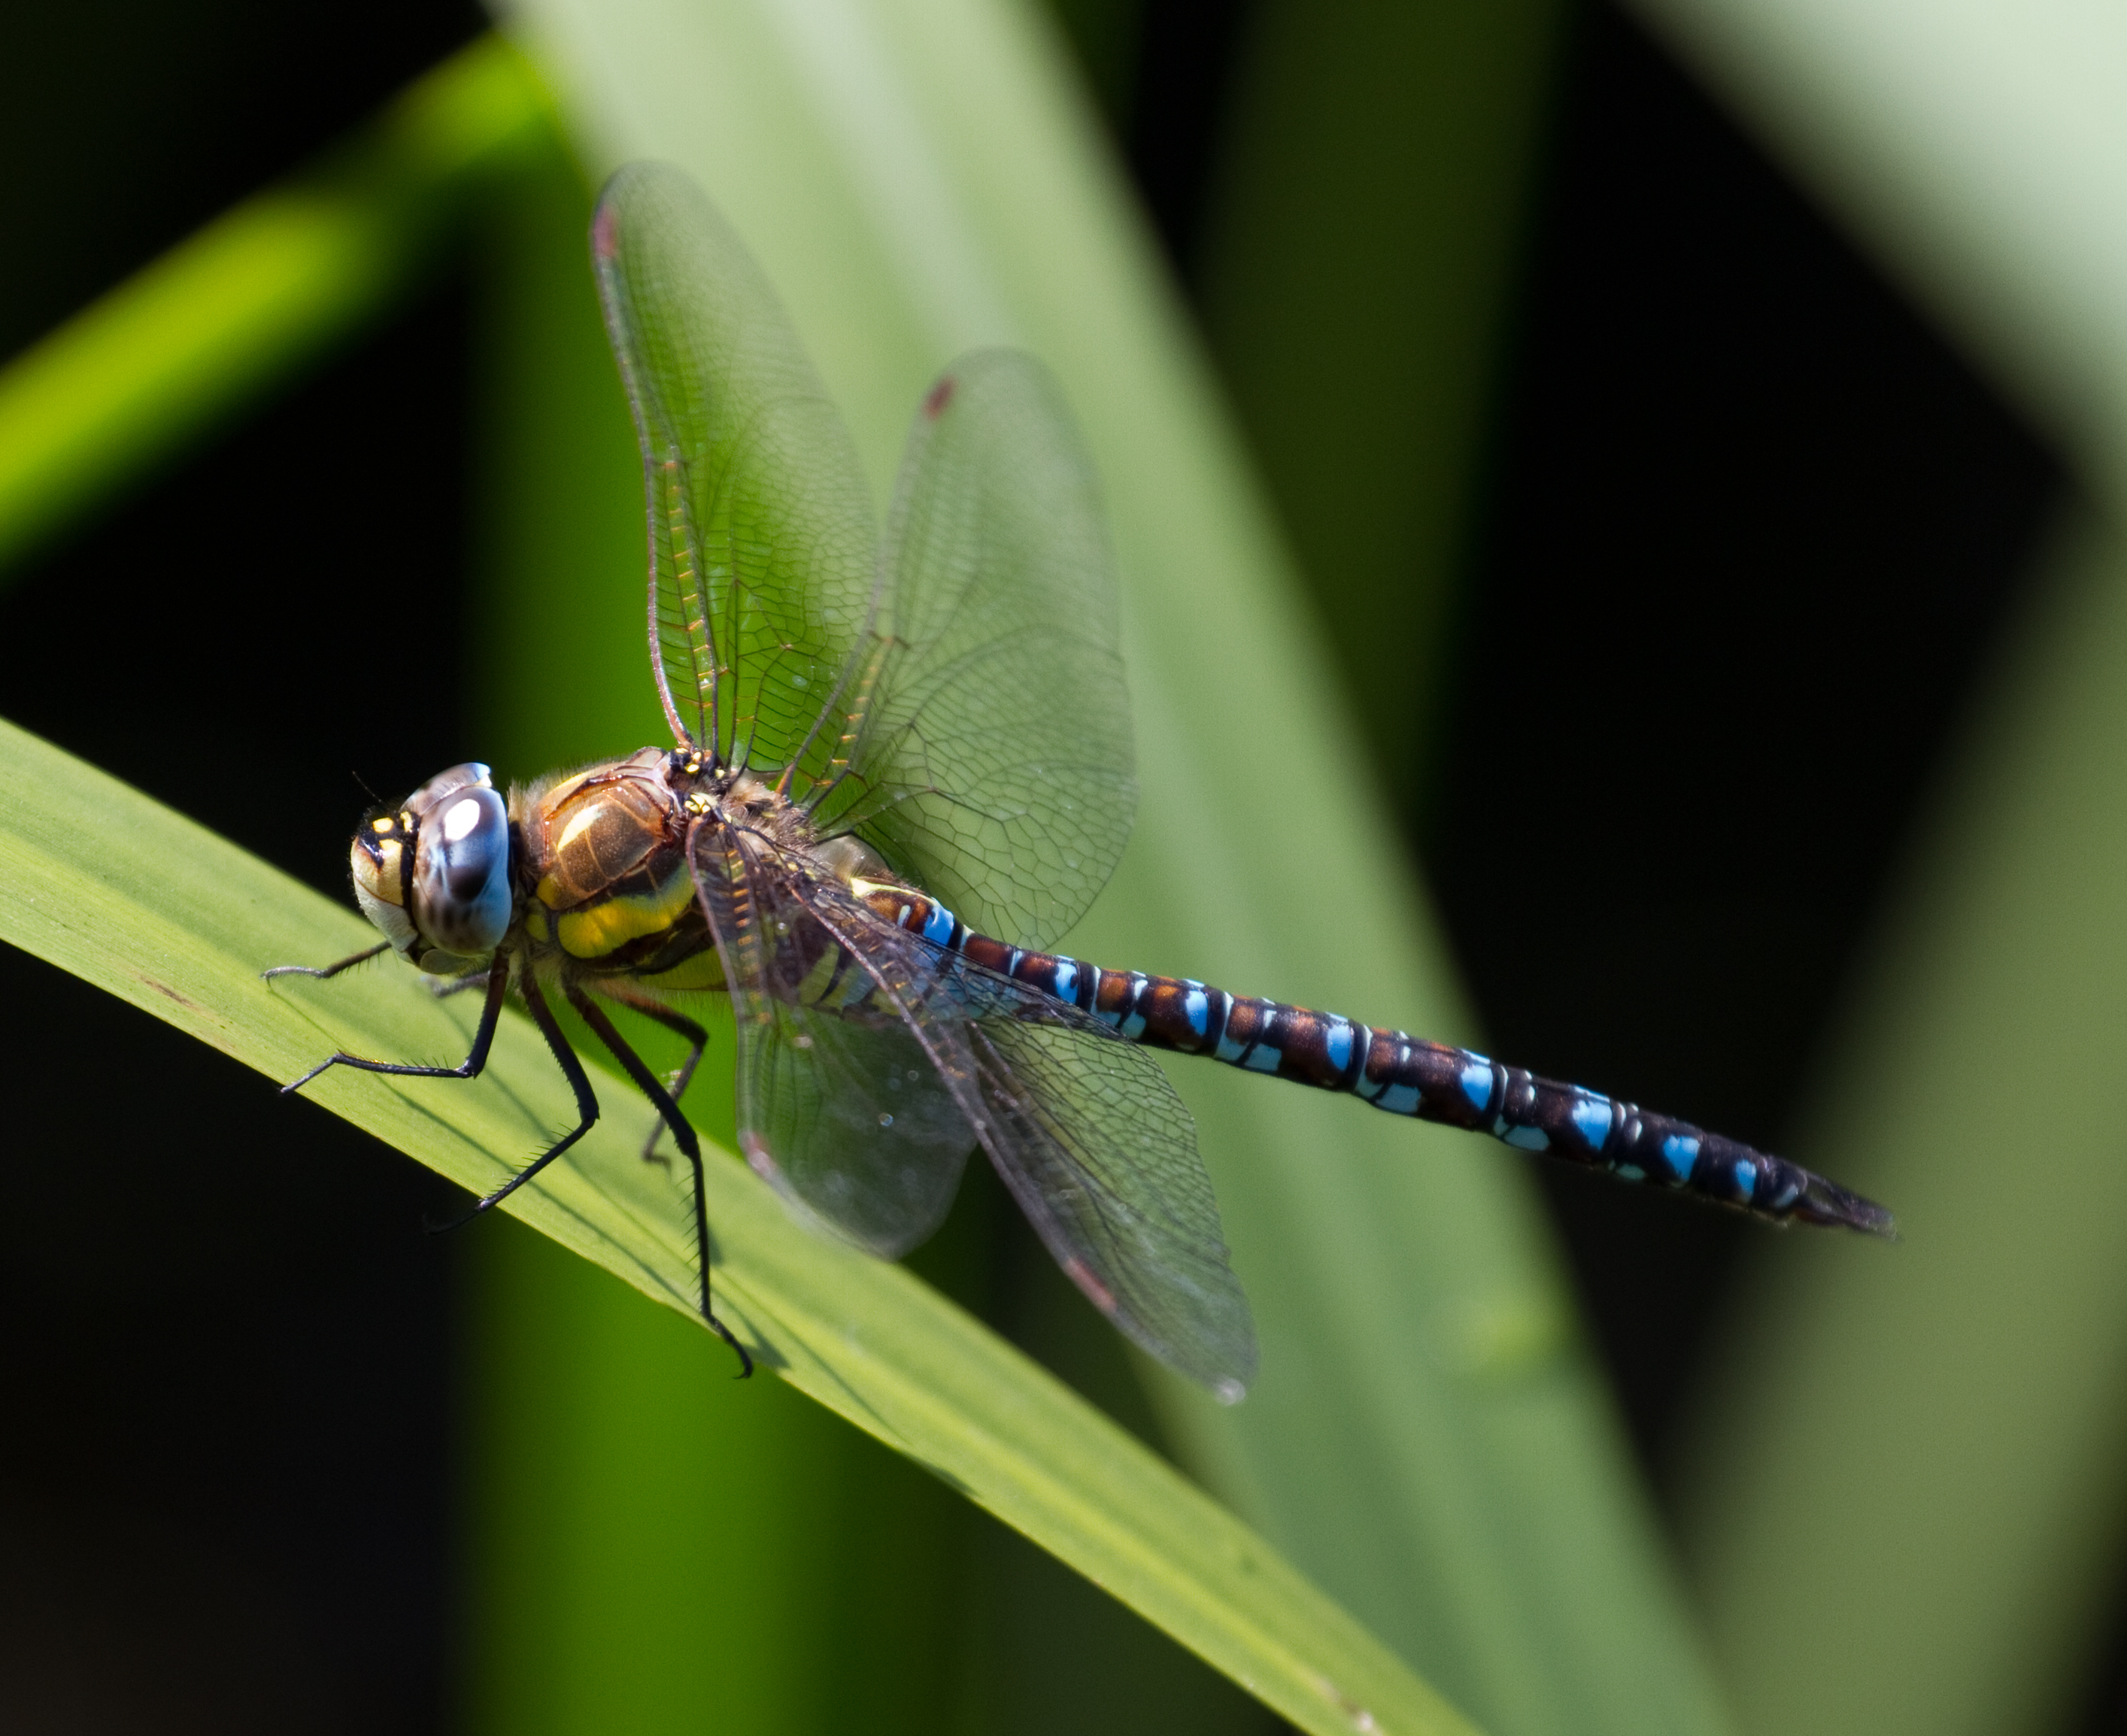 File:Common Hawker Dragonfly 9 (6083392044).jpg - Wikimedia Commons